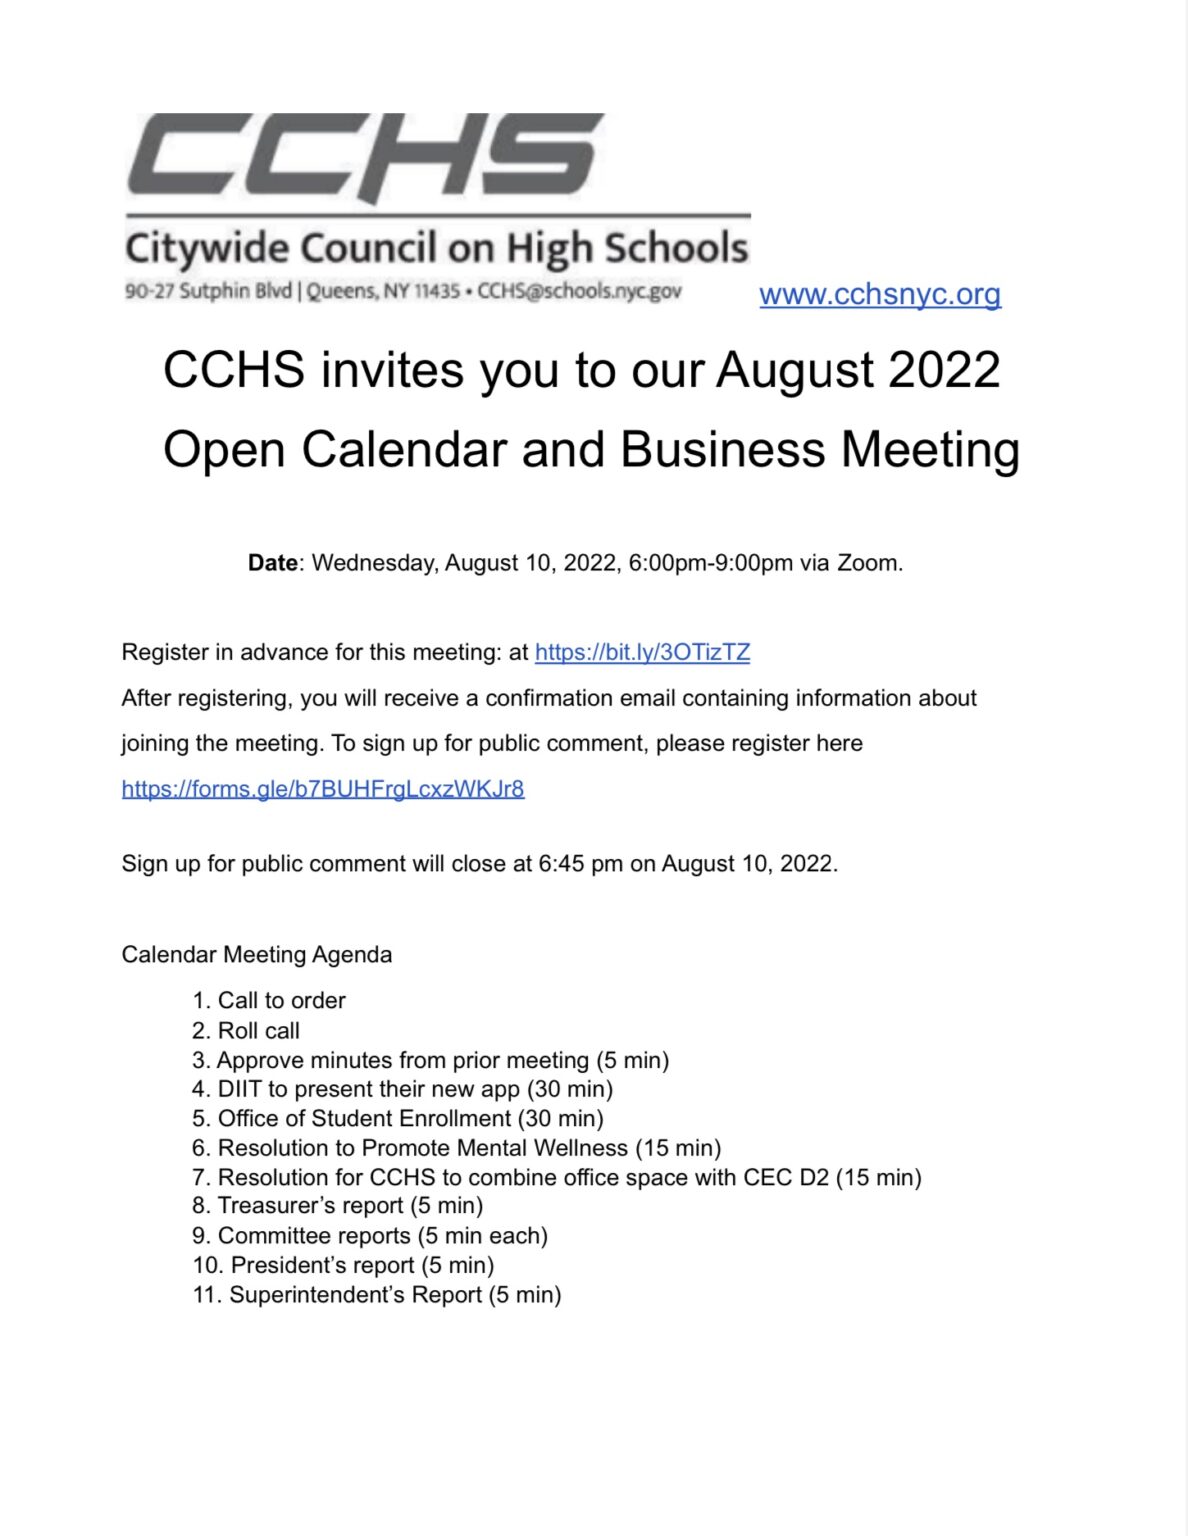 » CCHS July Calendar and Business Meeting Weds August 10 6pm